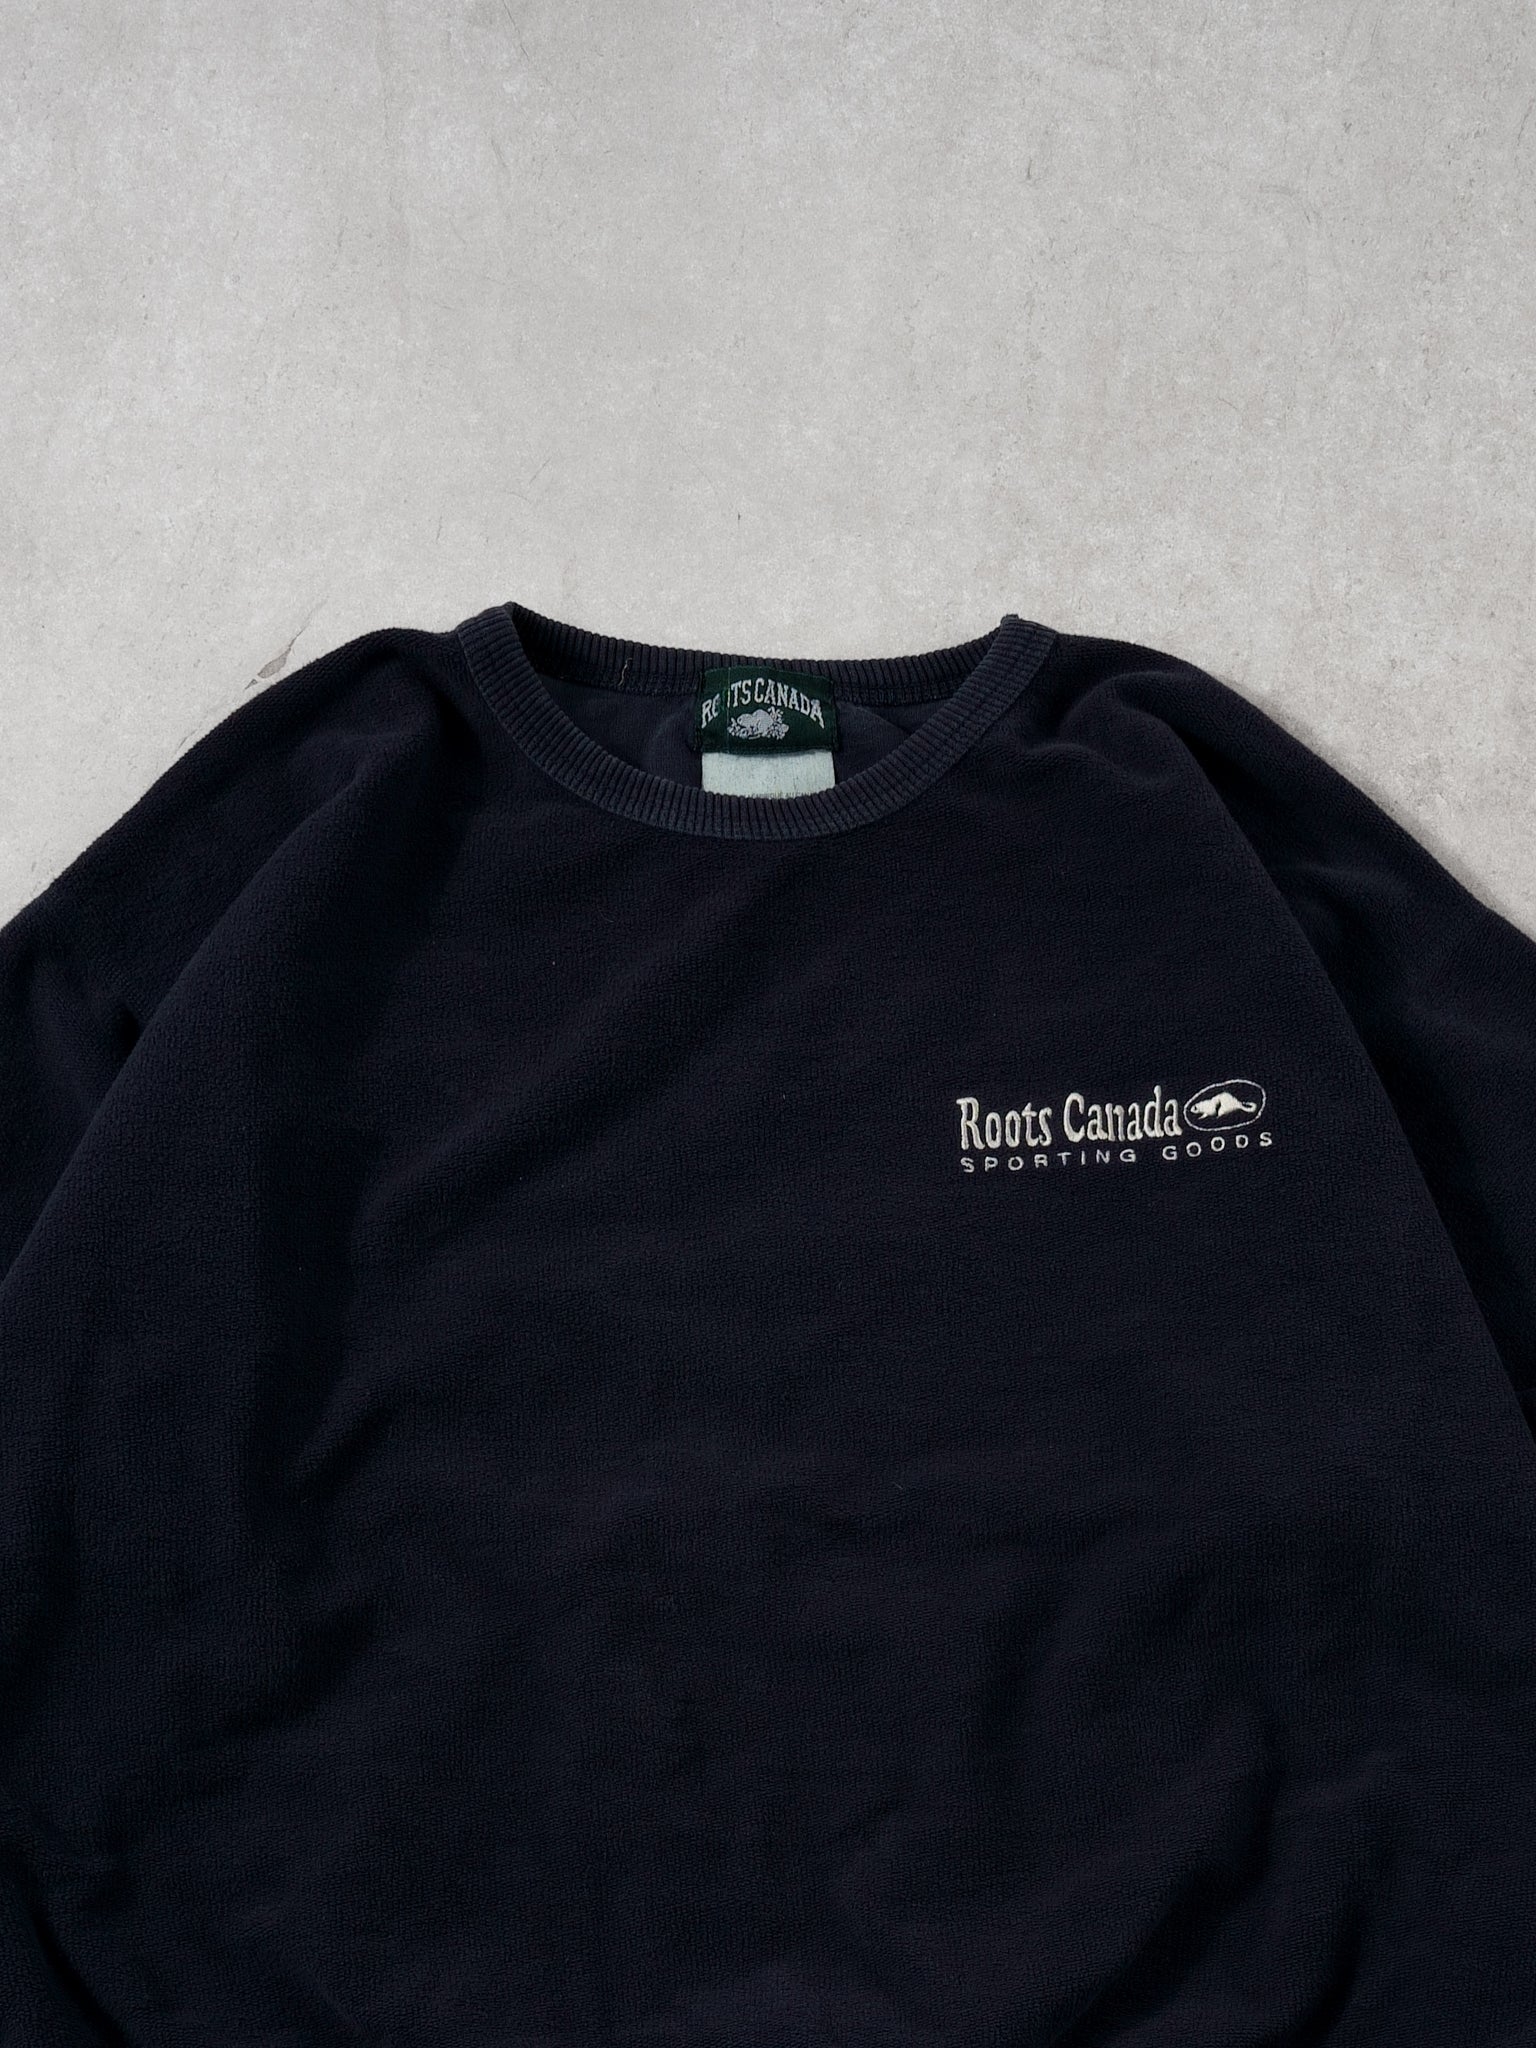 Vintage 80s Navy Blue Roots Canada Sporting Goods Crewneck (L)